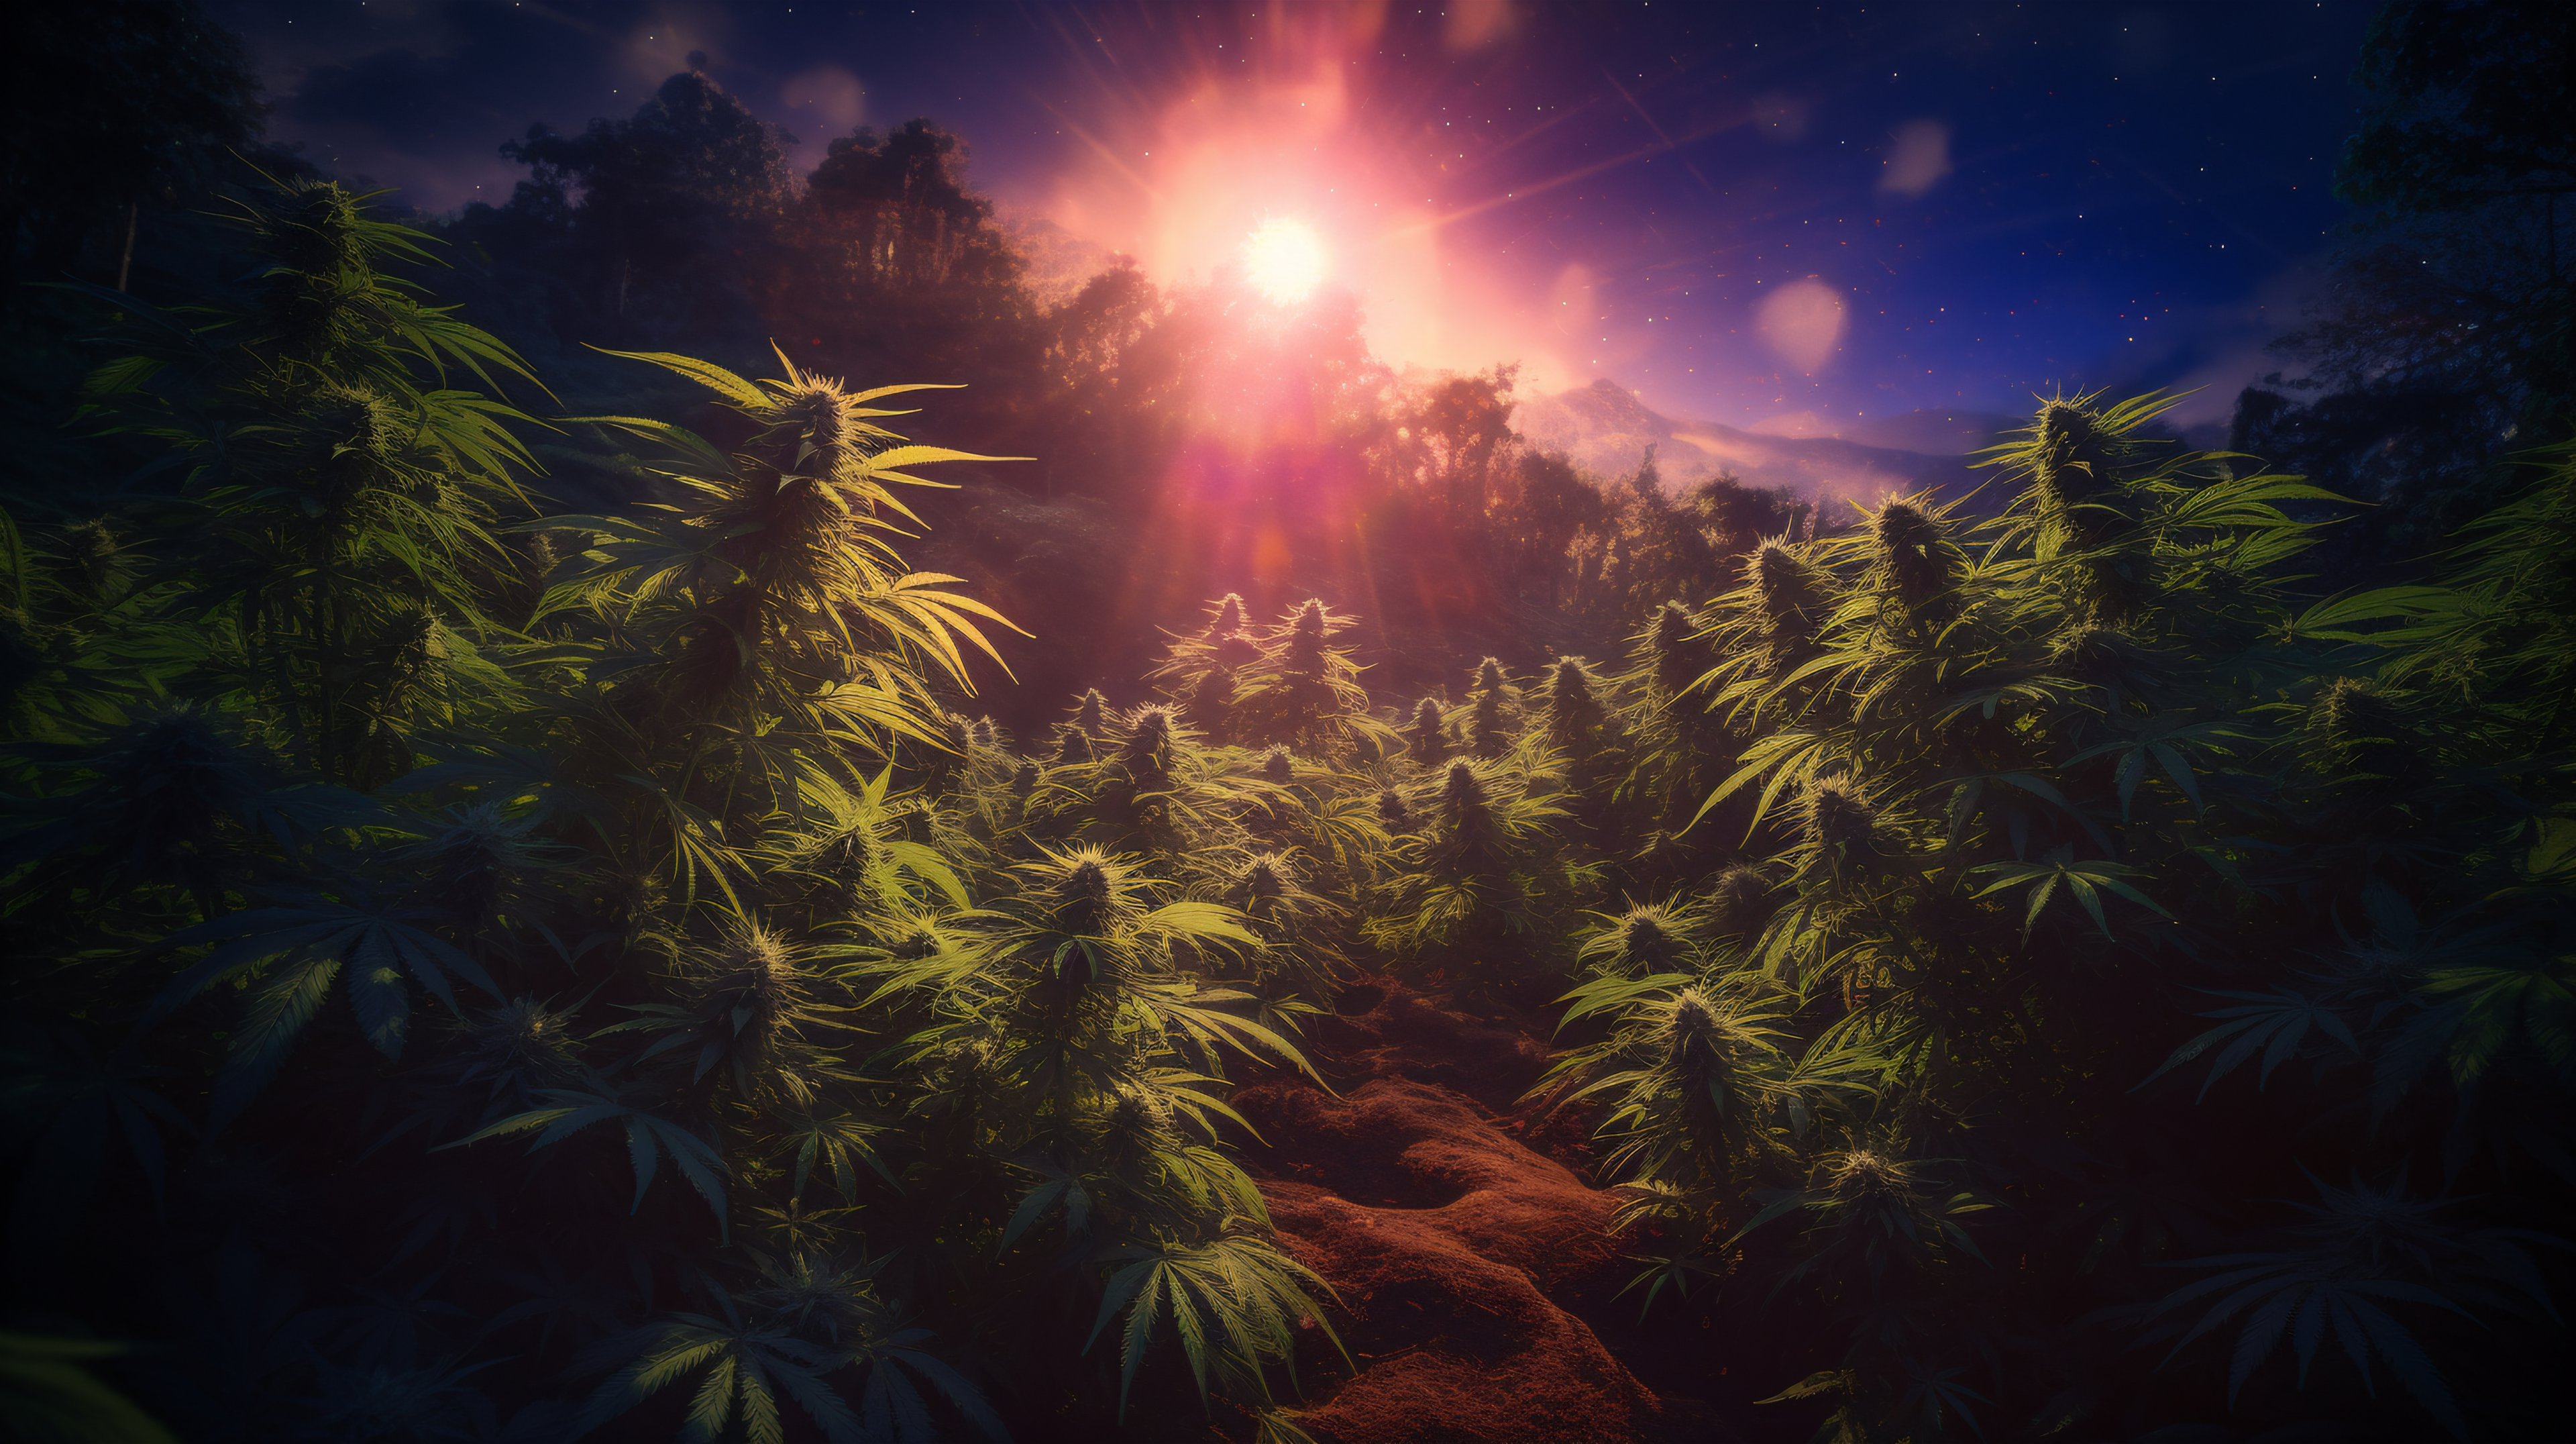 HHC is growing quickly in the world of cannabis. HHC has had reportedly different effects, adding to the range of potential benefits that it may offer to consumers.